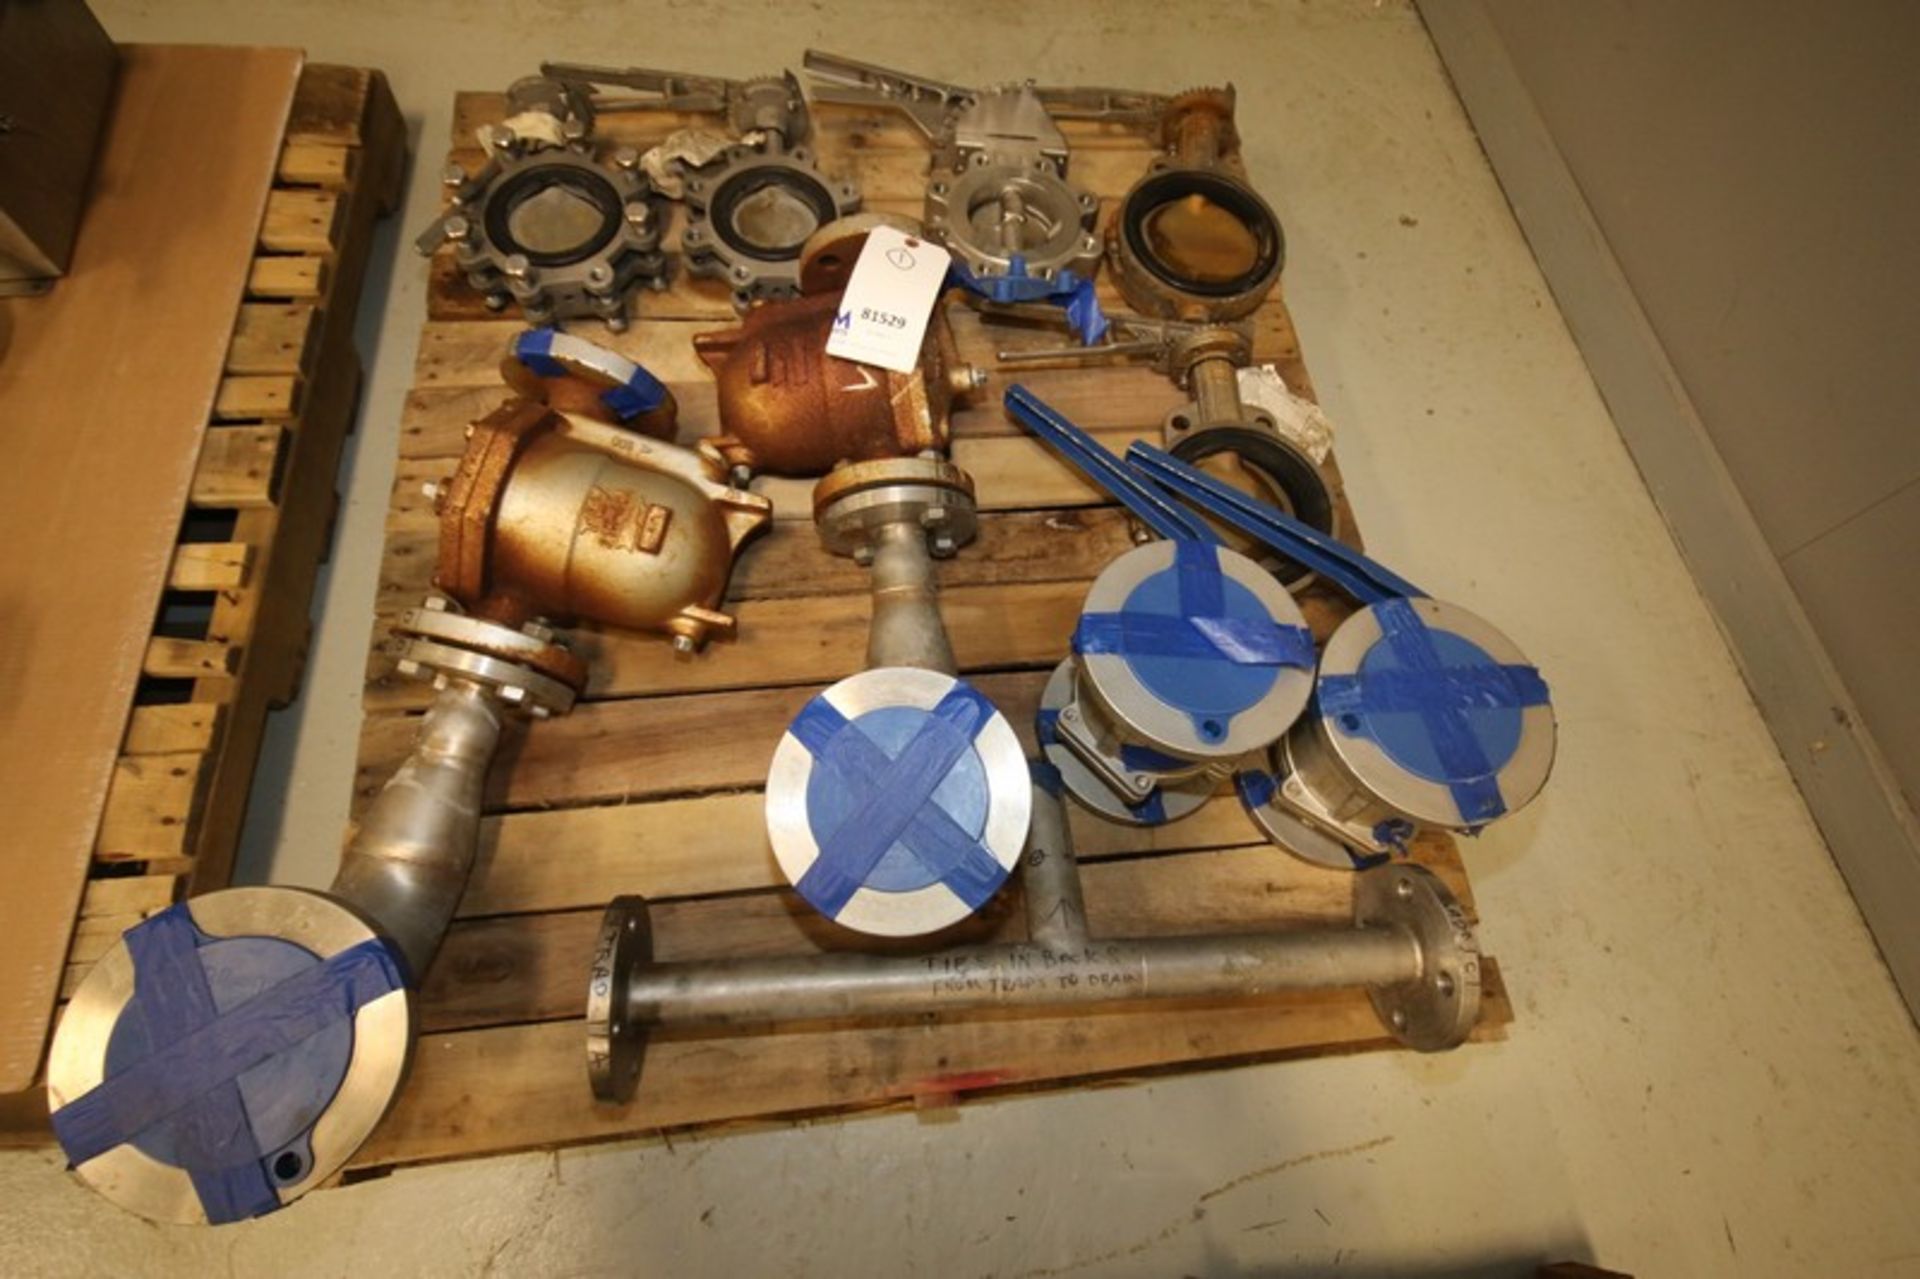 Lot of Assorted 9 Pcs Pipe Fittings Including Traps, Ball Valves & Butterfly Valves, Up to 6",